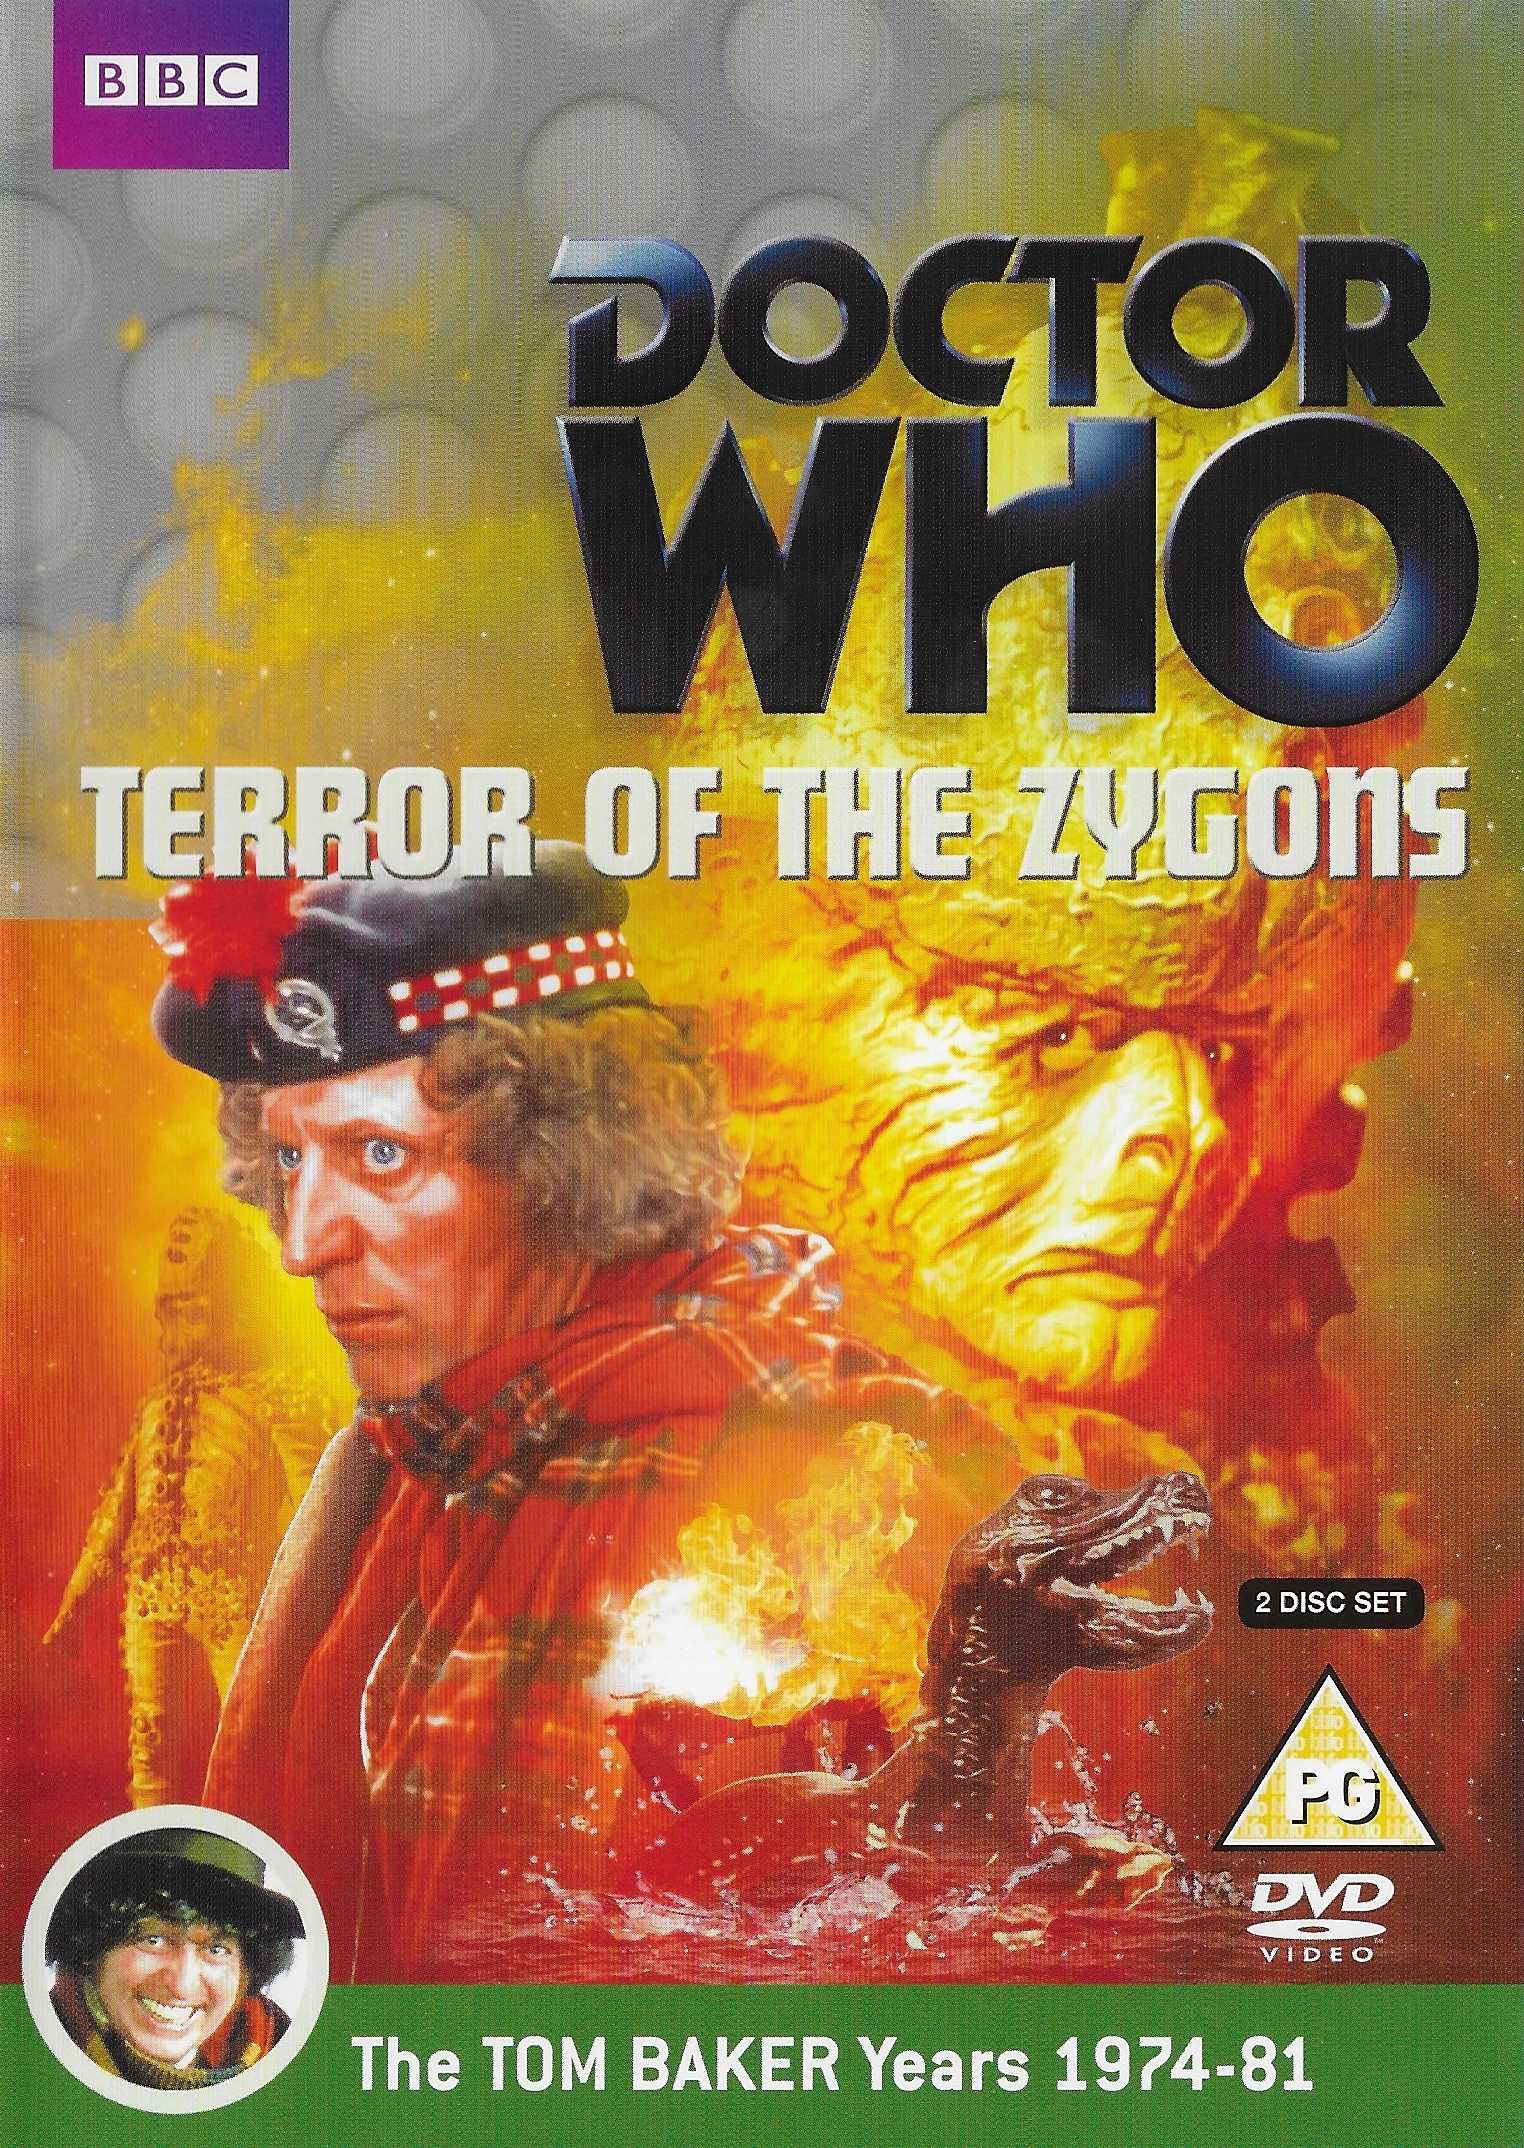 Picture of BBCDVD 3482 Doctor who - Terror of the Zygons by artist Robert Banks Stewart from the BBC dvds - Records and Tapes library